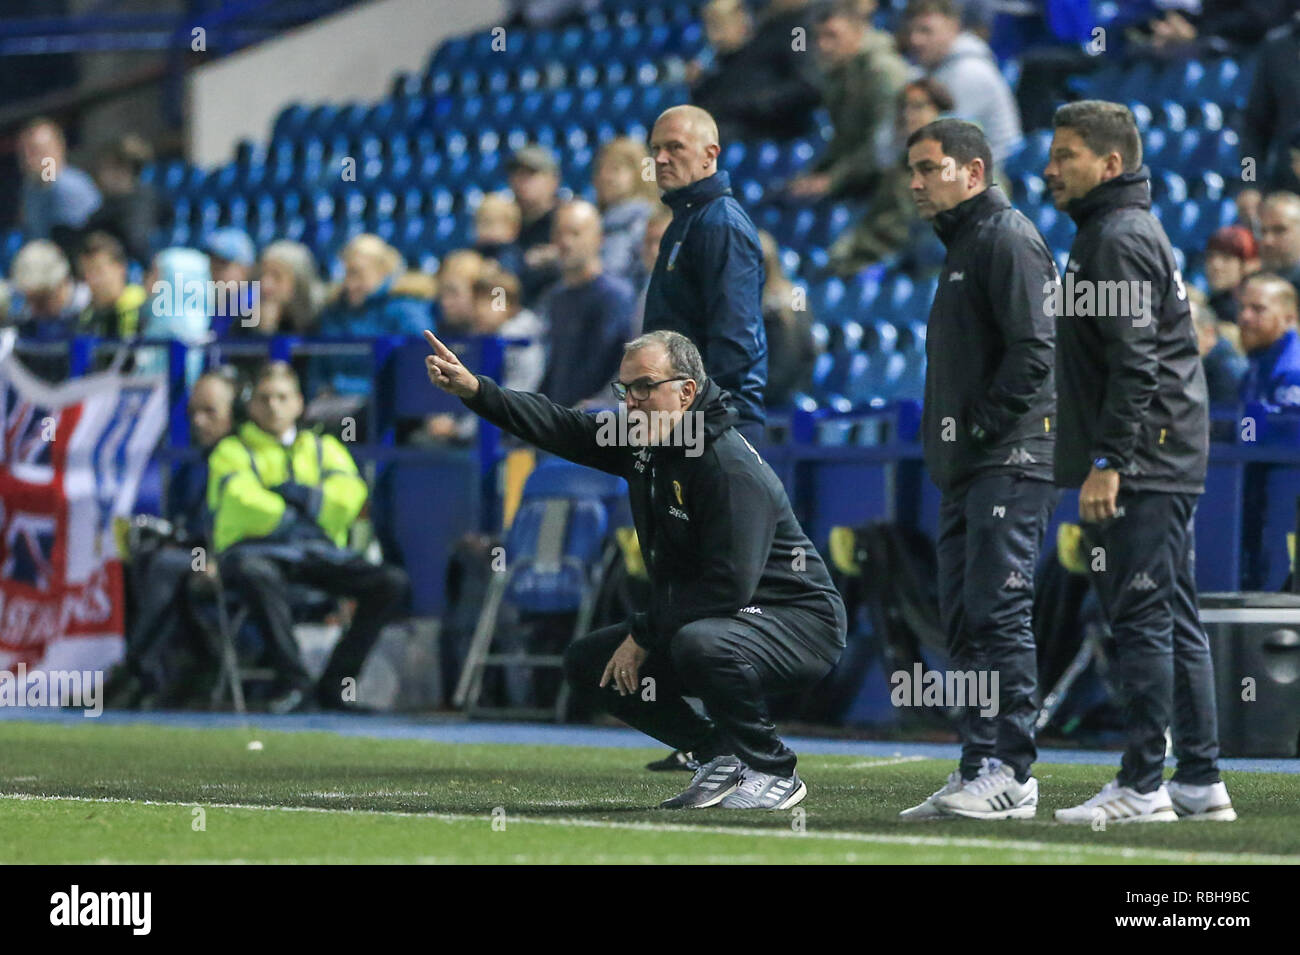 28th September 2018, Hillsborough, Sheffield, England; Sky Bet Championship, Sheffield Wednesday v Leeds Utd : Marcelo Bielsa manager of Leeds Utd furiously gives out instructions to his trailing side  Credit: Mark Cosgrove/News Images,  English Football League images are subject to DataCo Licence Stock Photo